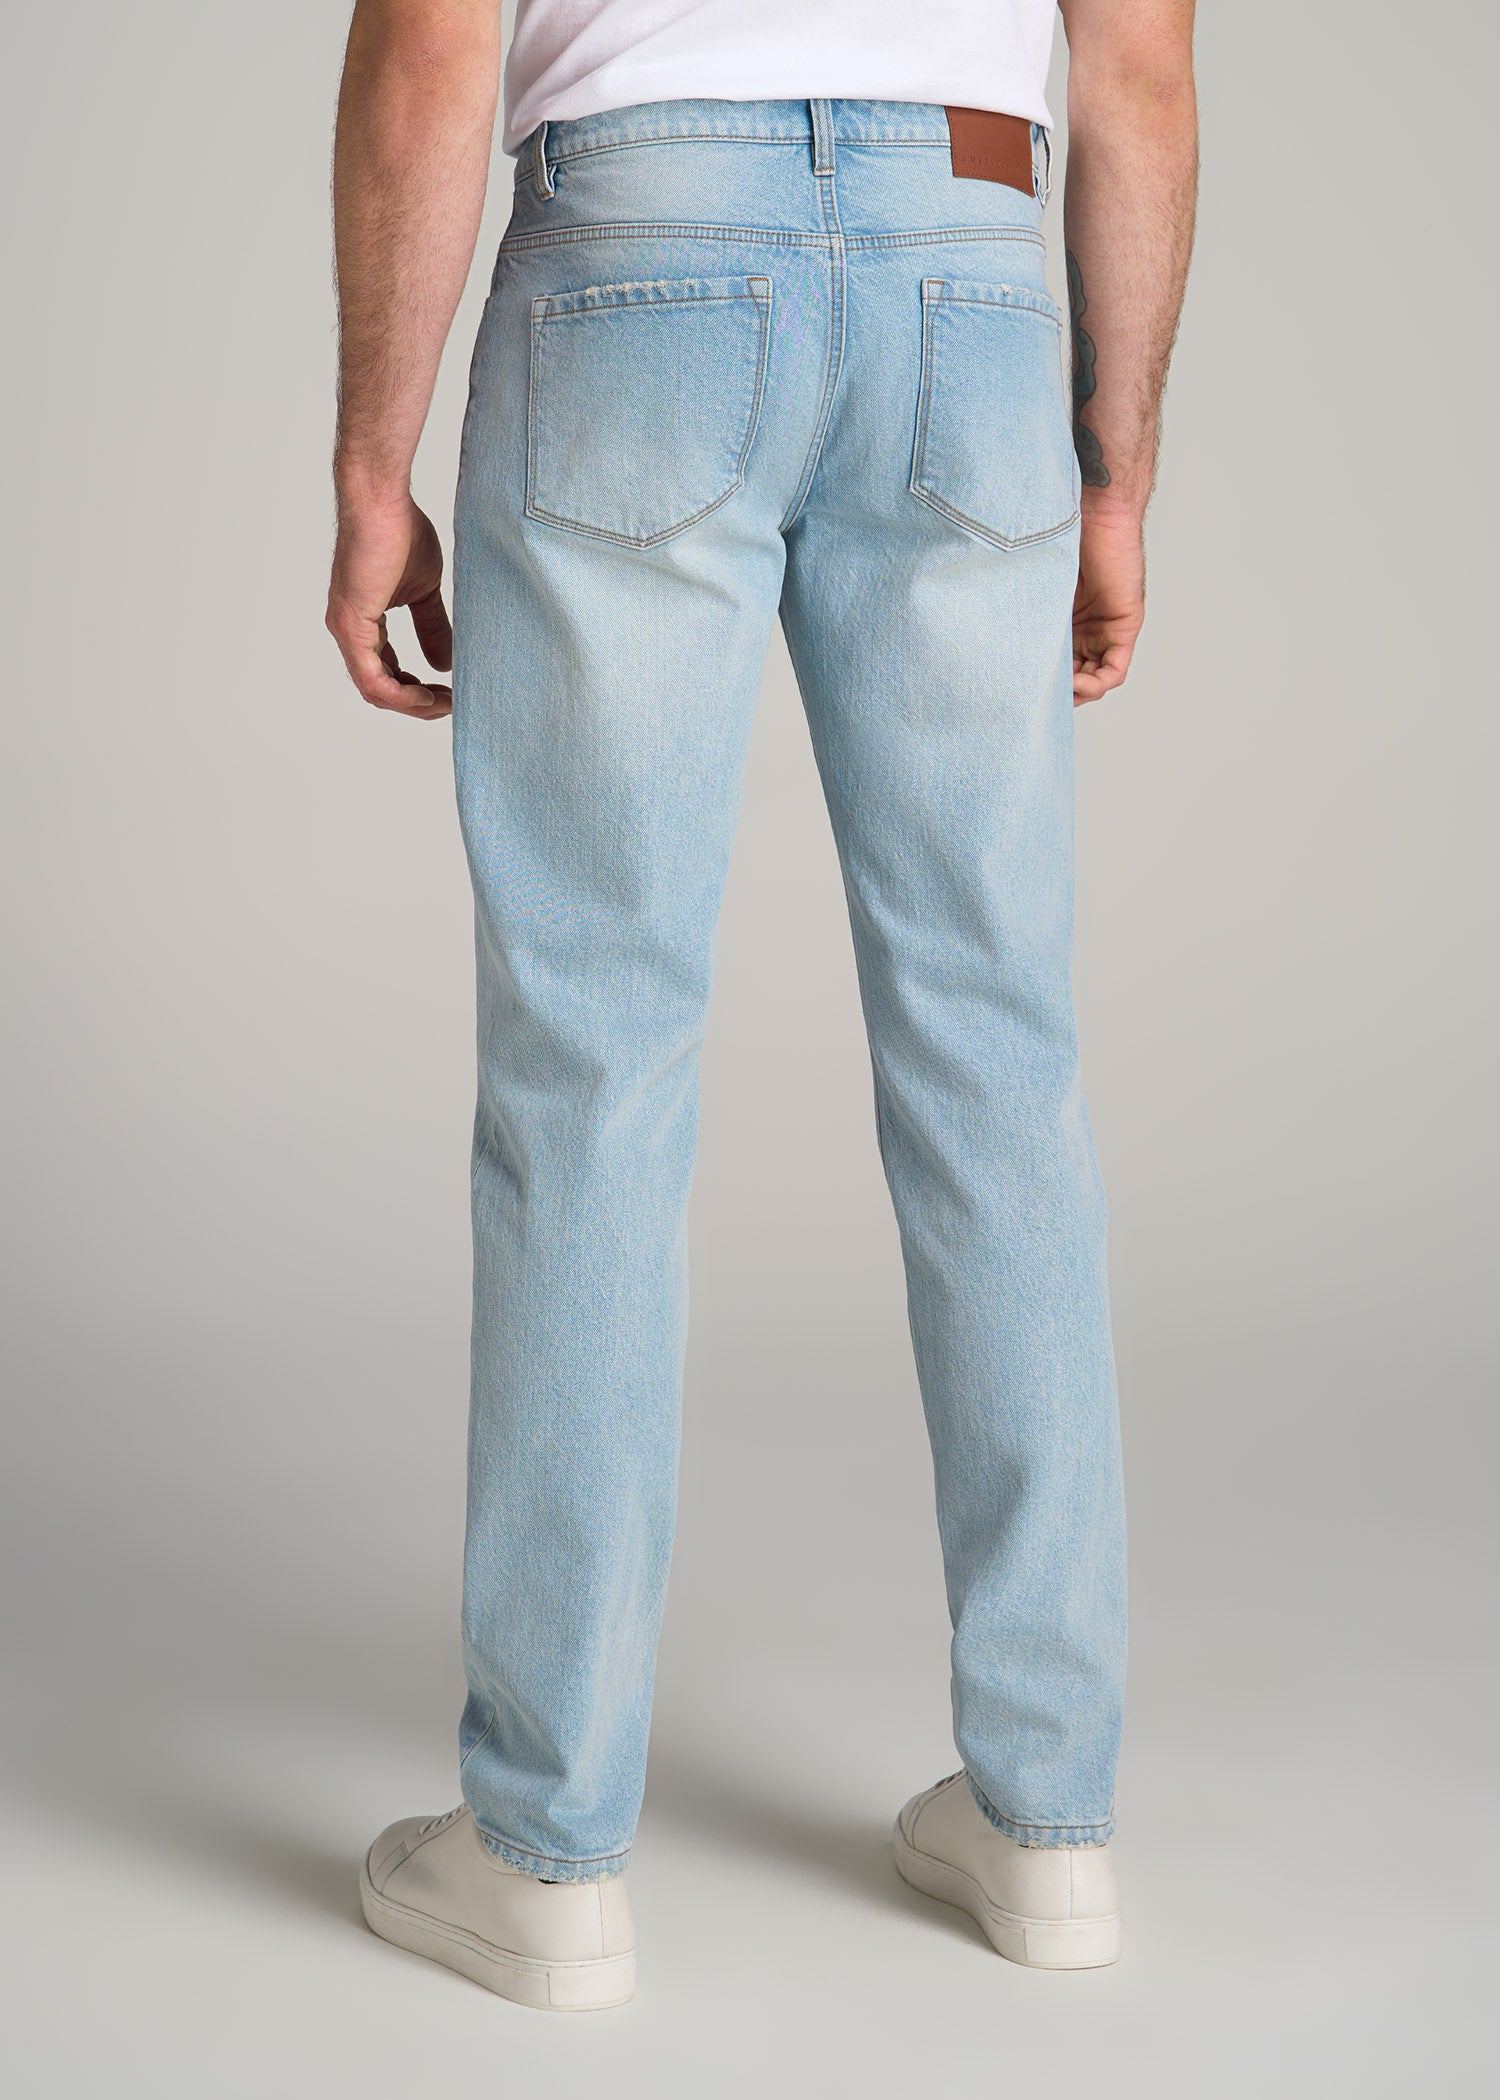 Milo Relaxed Tapered Fit Jeans for Tall Men | American Tall